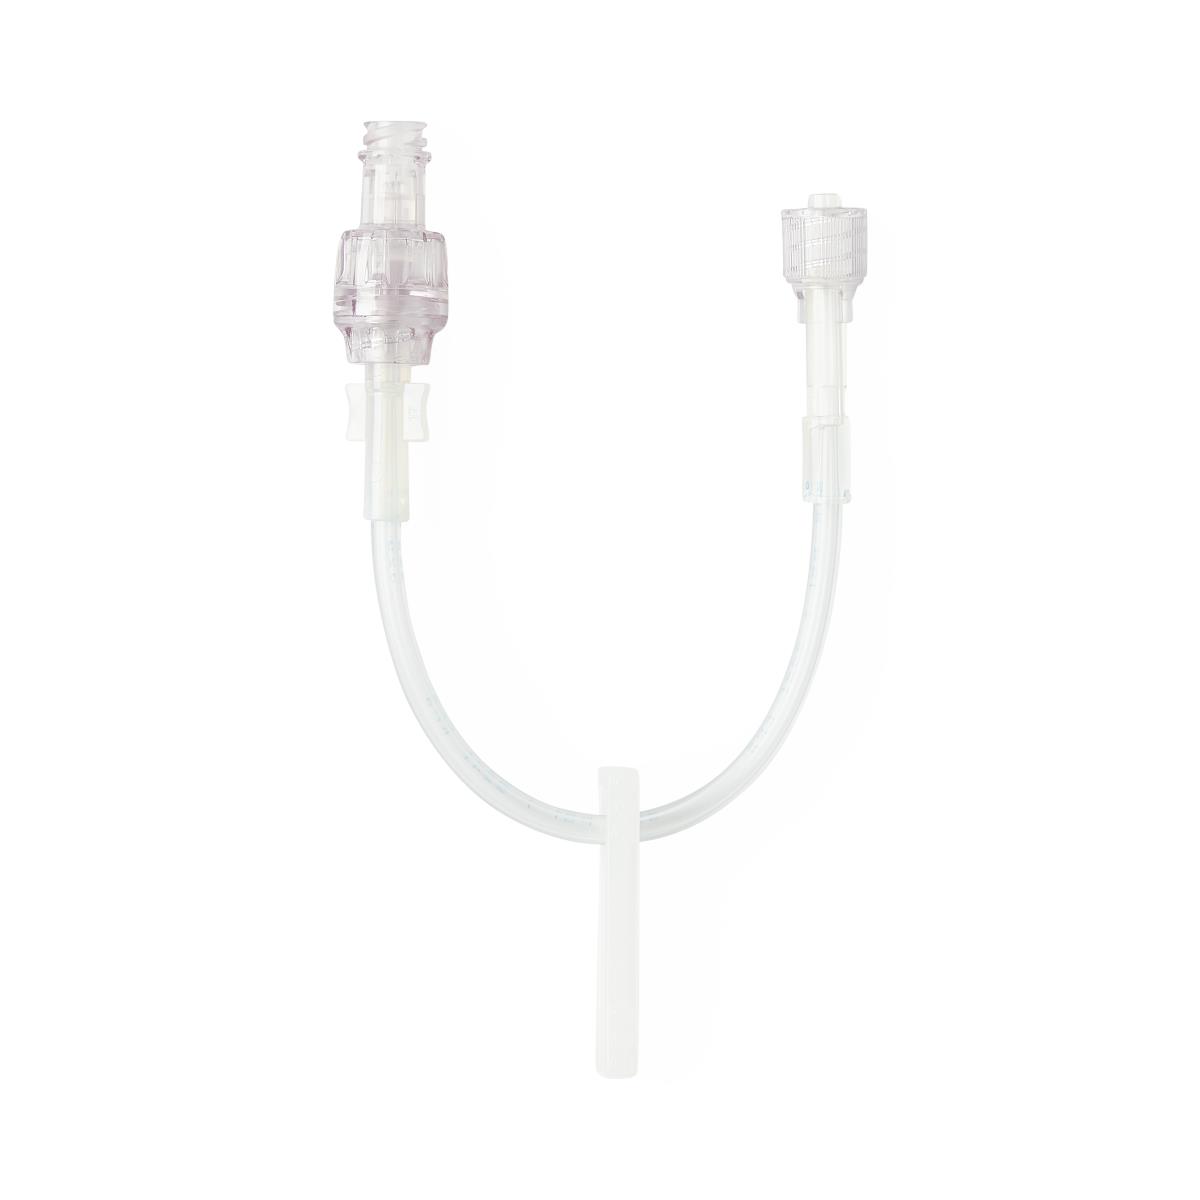 1-Link Needle-Free IV Connectors